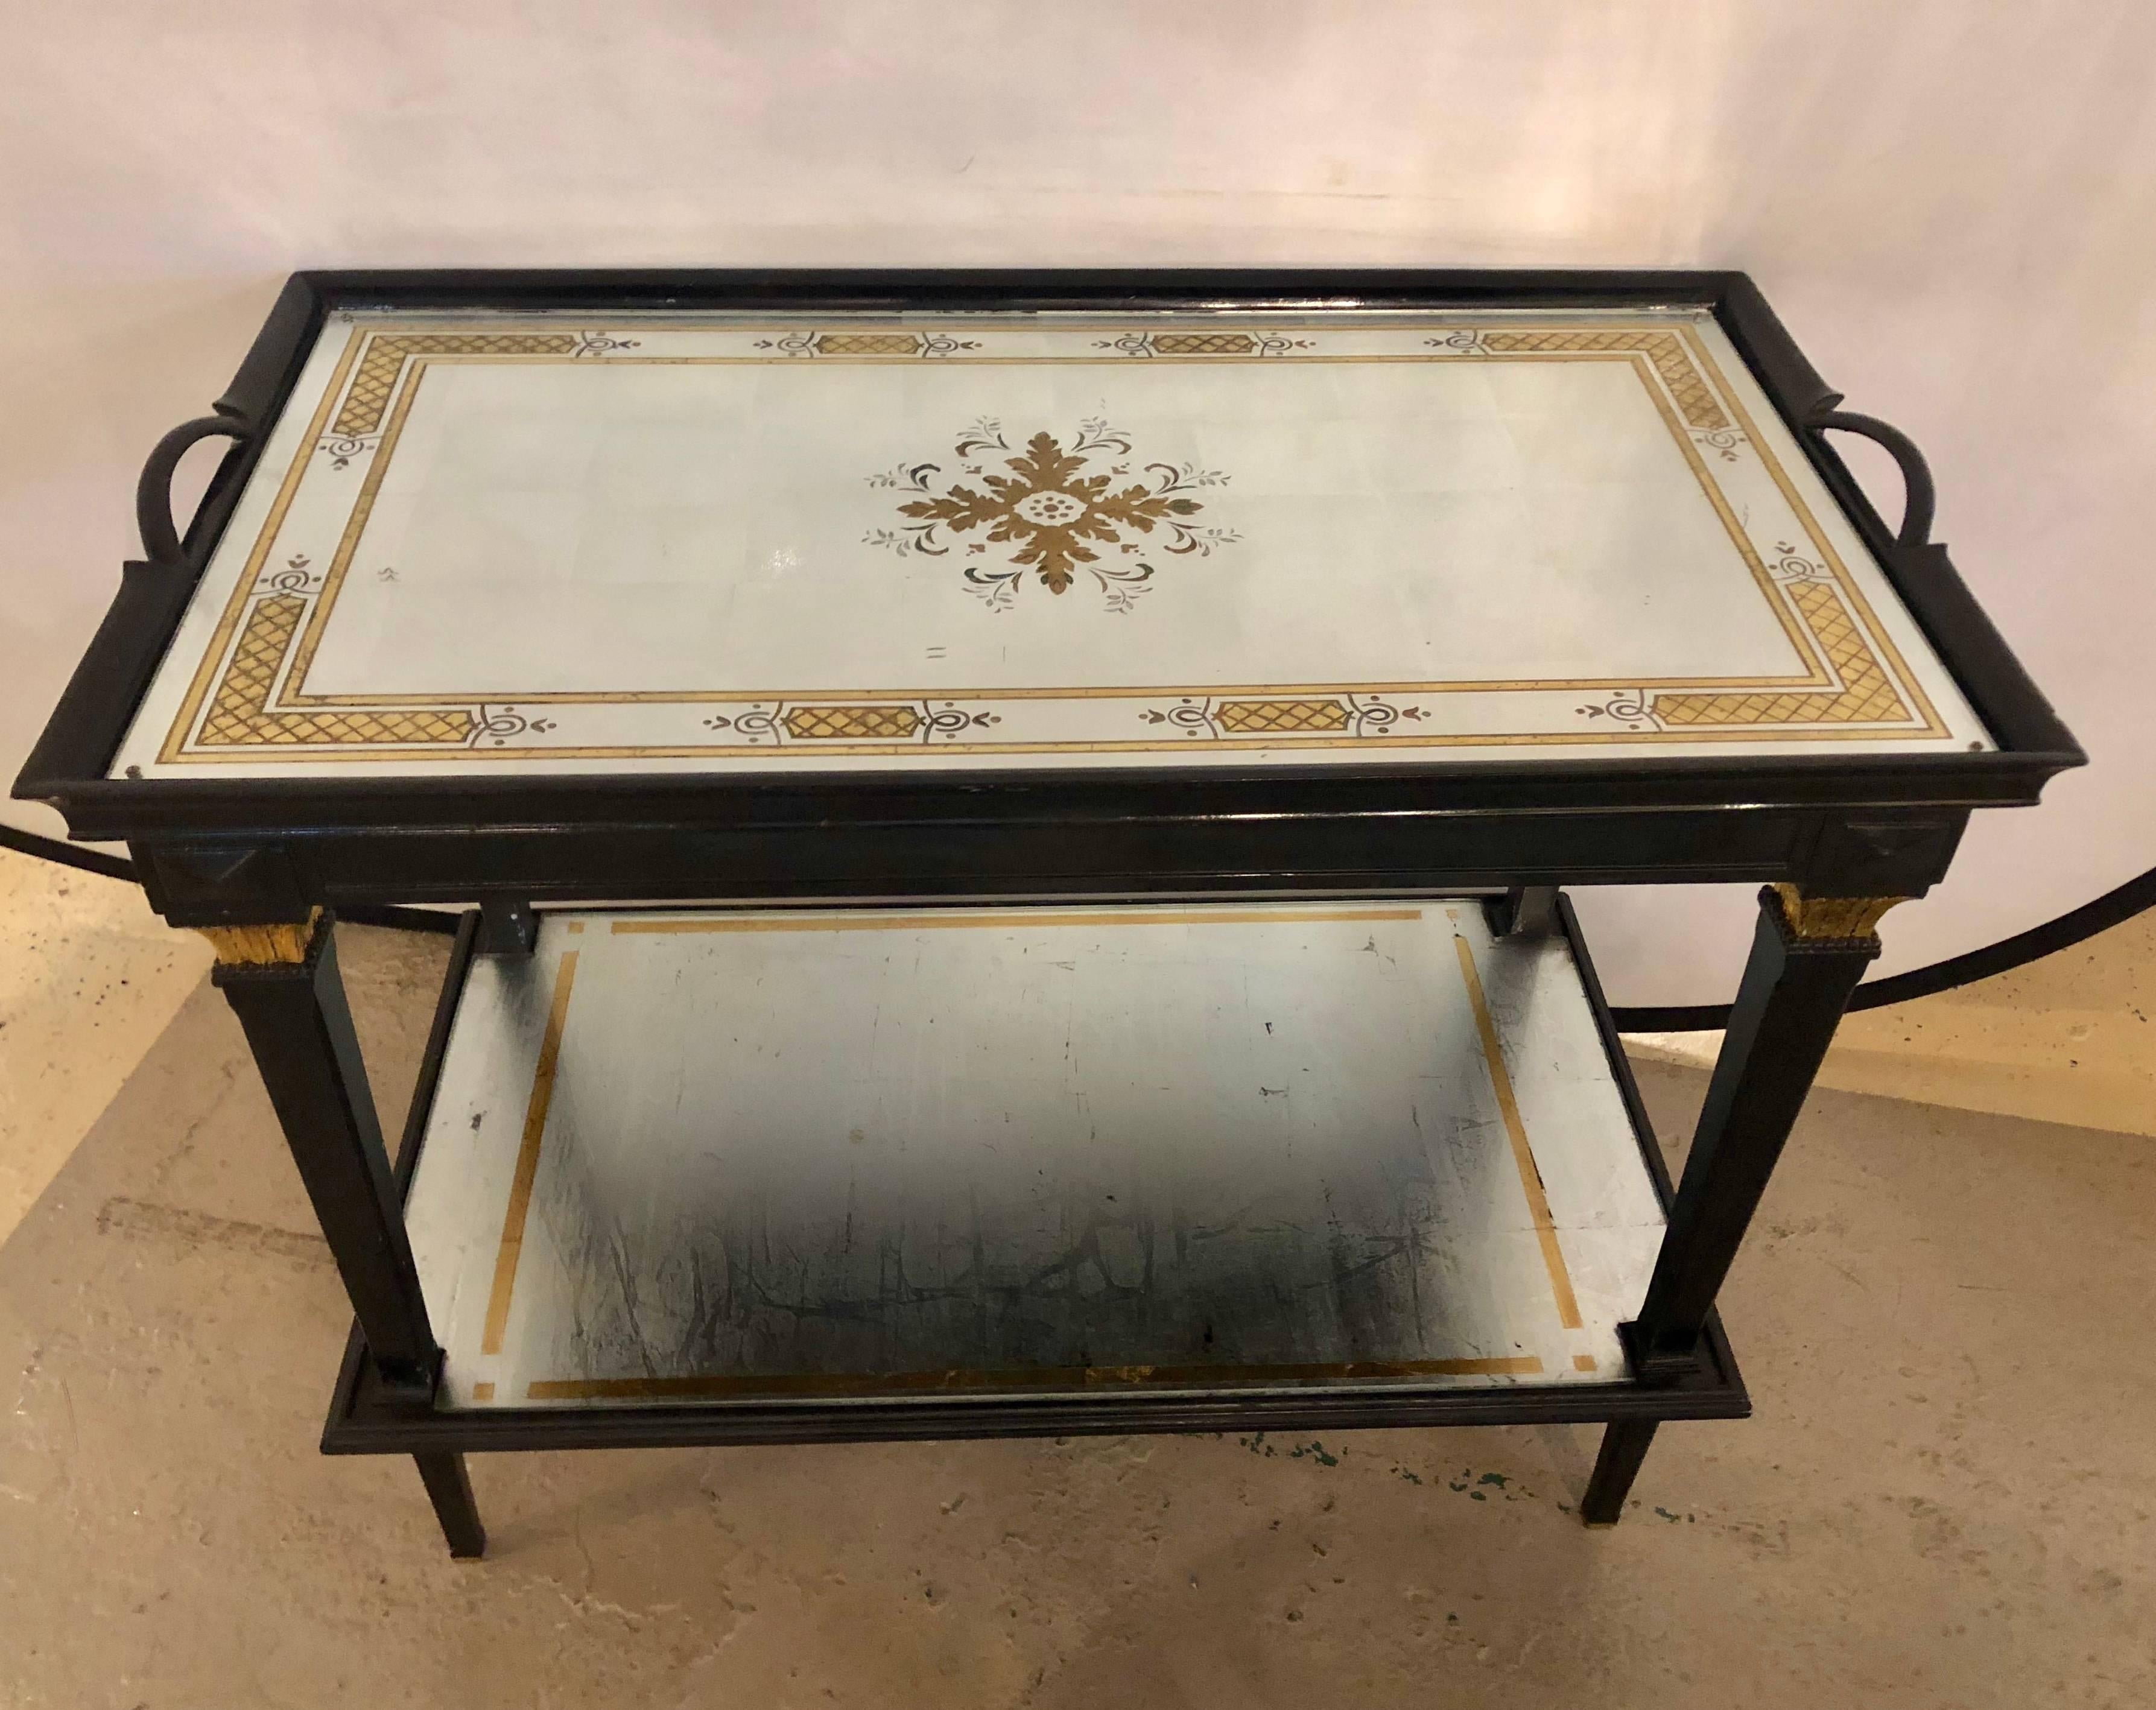 A fine Jansen two-tier serving cart having an églomisé removable tray top on an ebonized frame. This wonderfully decorative Hollywood Regency table has a mirrored design upper lift off serving tray top on an ebony base with a lower mirrored and